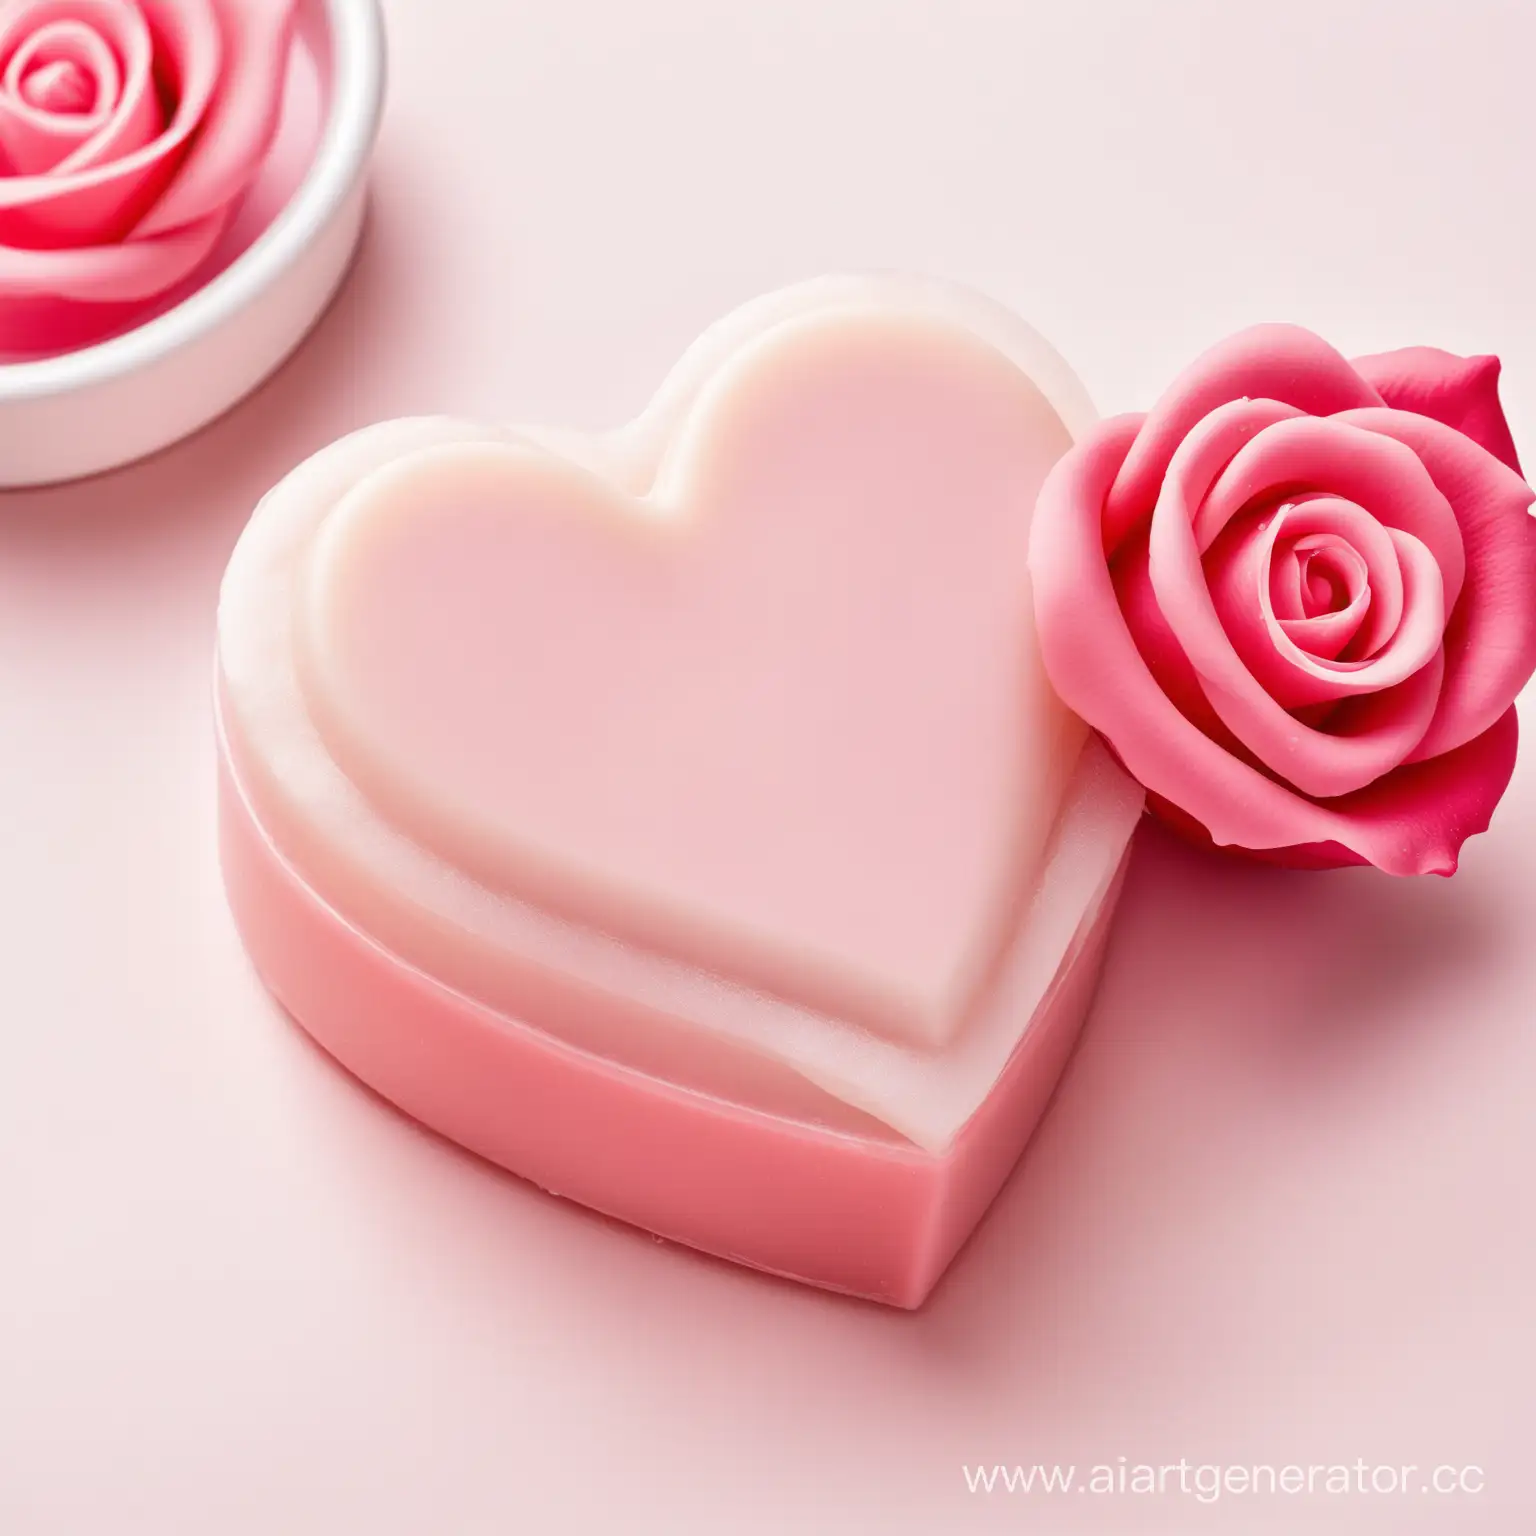 Romantic-Heartshaped-Soap-with-Rose-Spa-Essentials-for-Valentines-Day